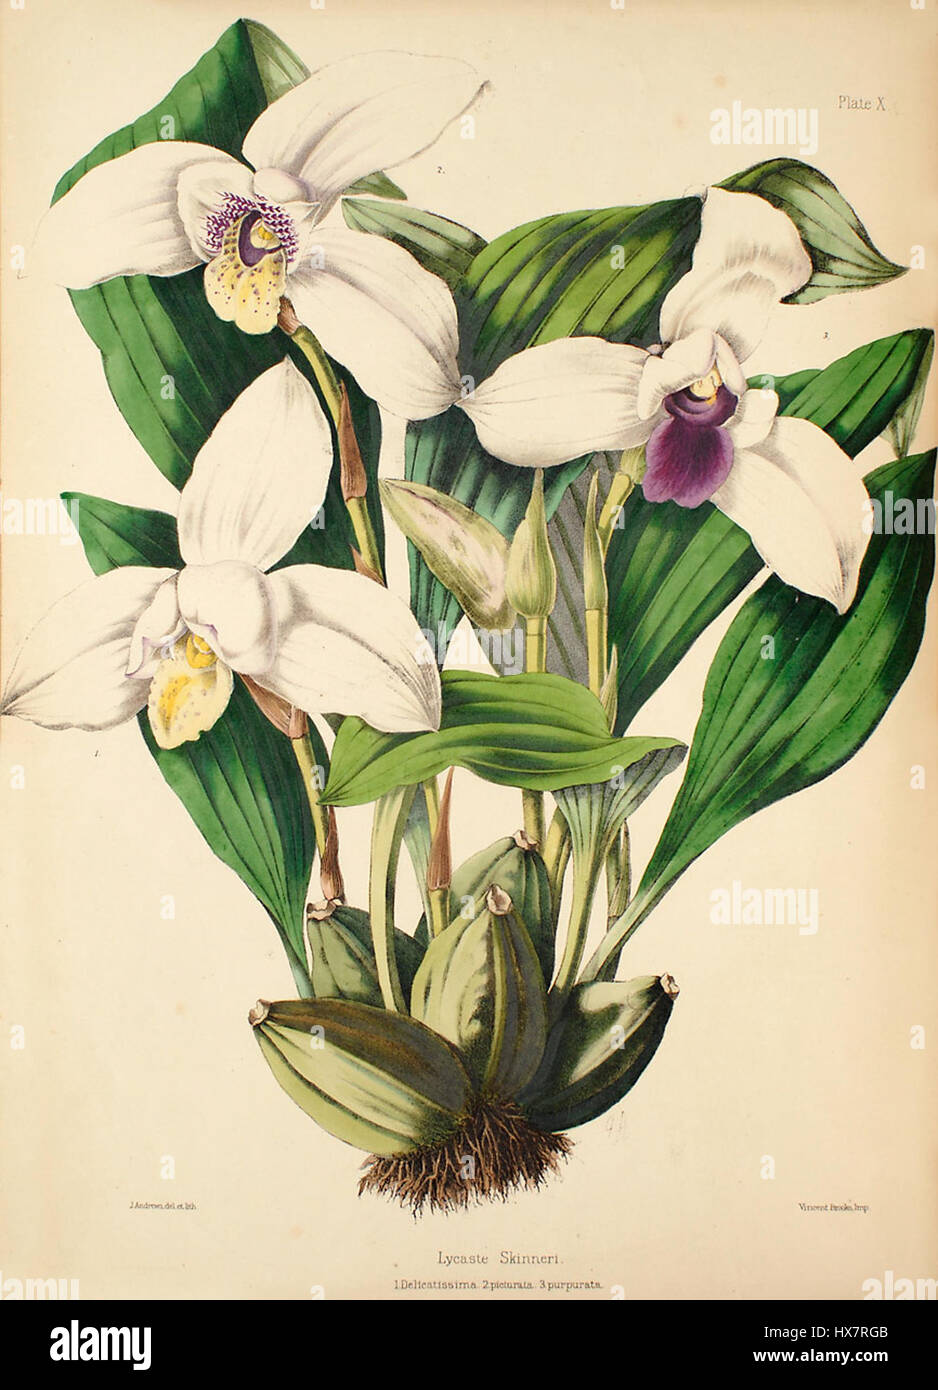 Lycaste skinneri   Warner, Williams   Select orch. plants 1, pl. 10 (1862 1865) Stock Photo